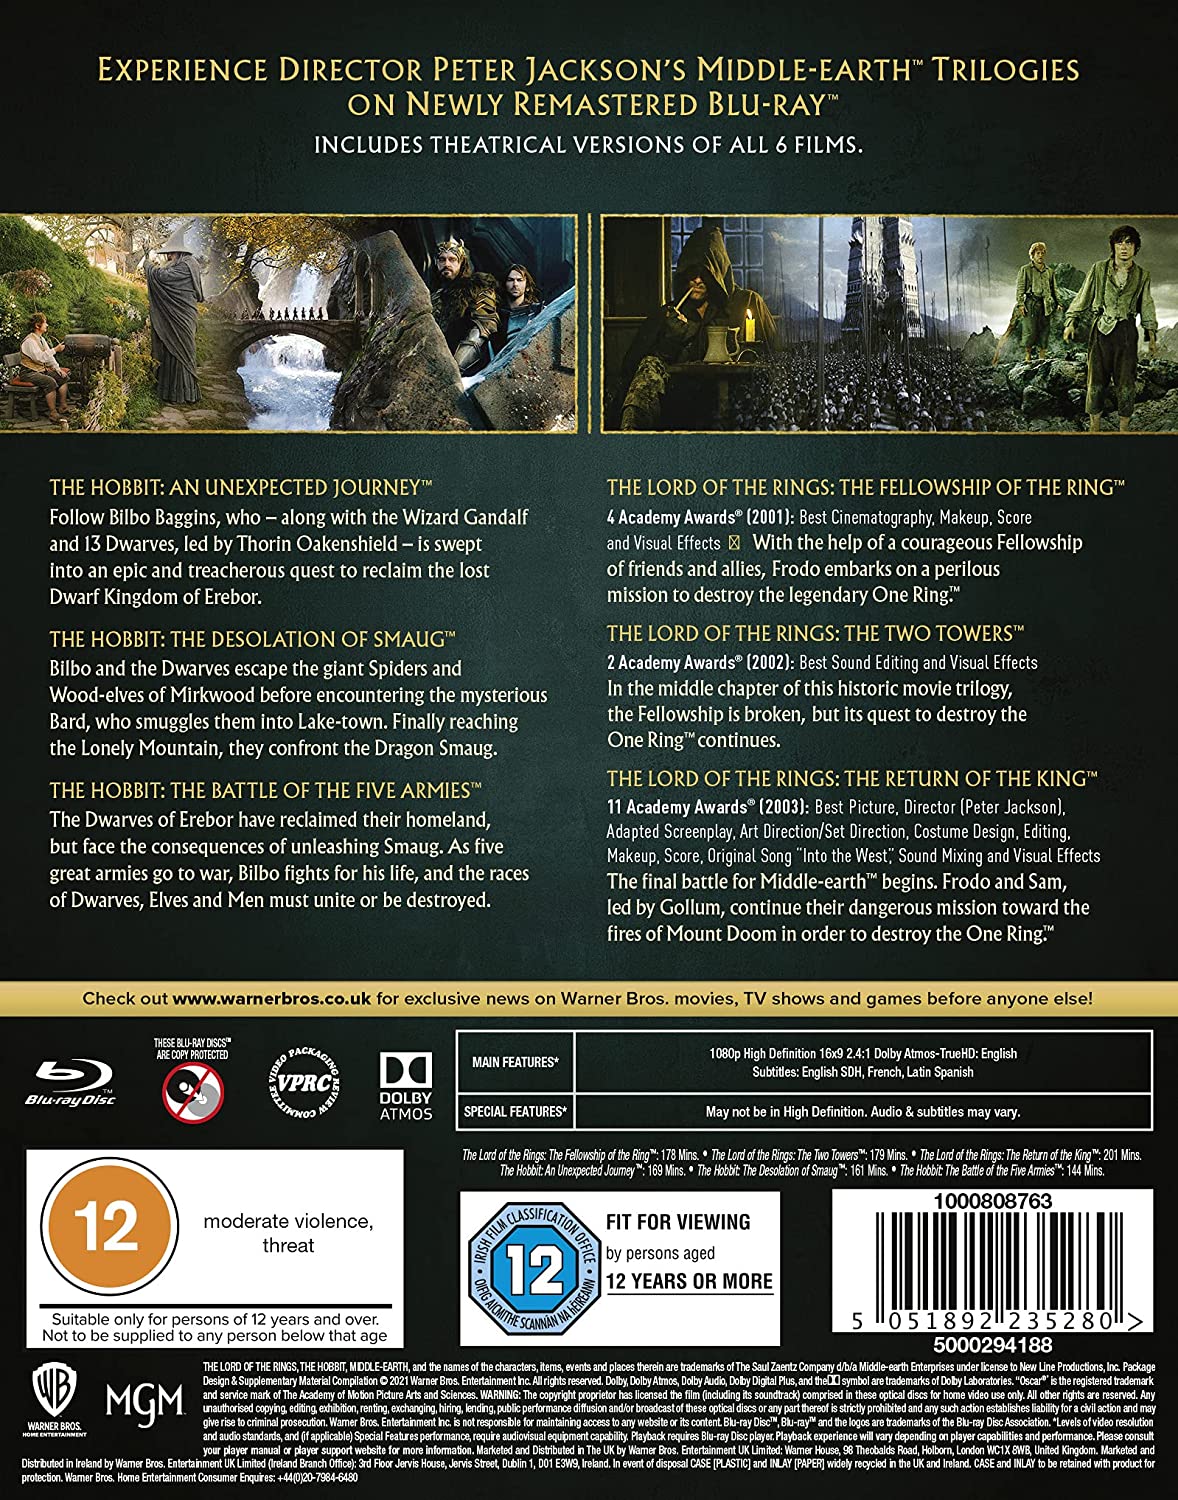 MIDDLEEARTHCOLLECTIONBD